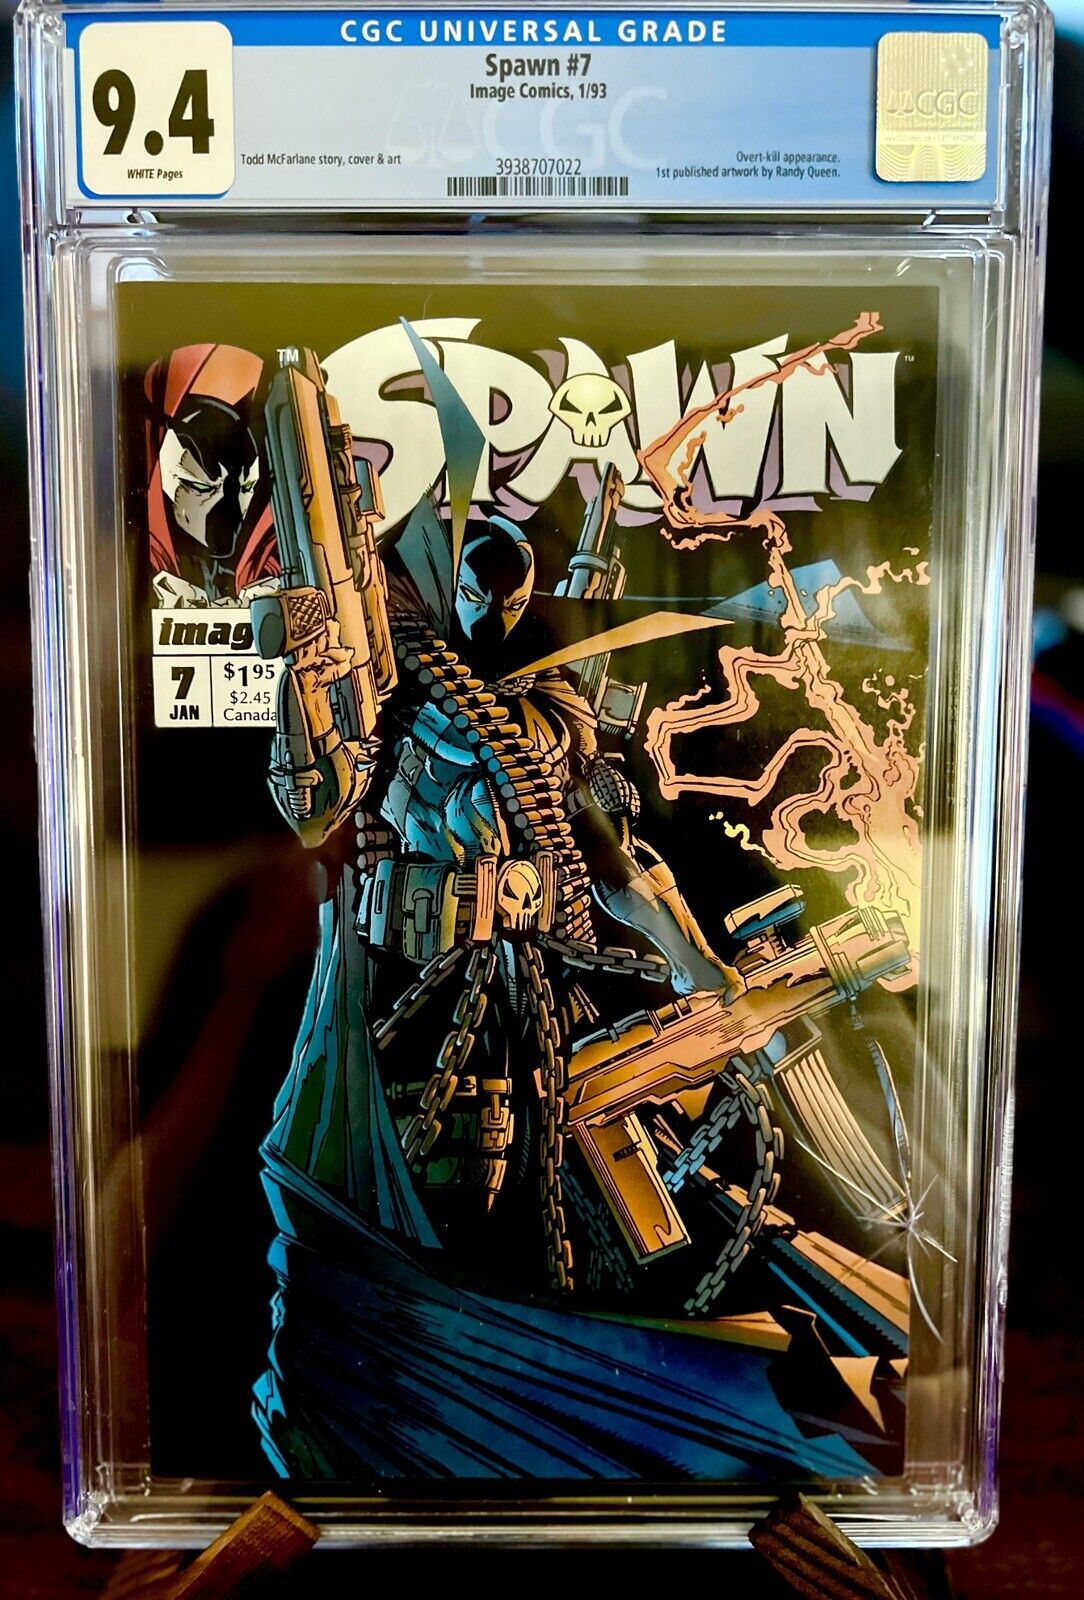 Spawn # 7 - Overt-Kill Appearance 1993 - CGC Graded 9.4 - White Pages, McFarlane